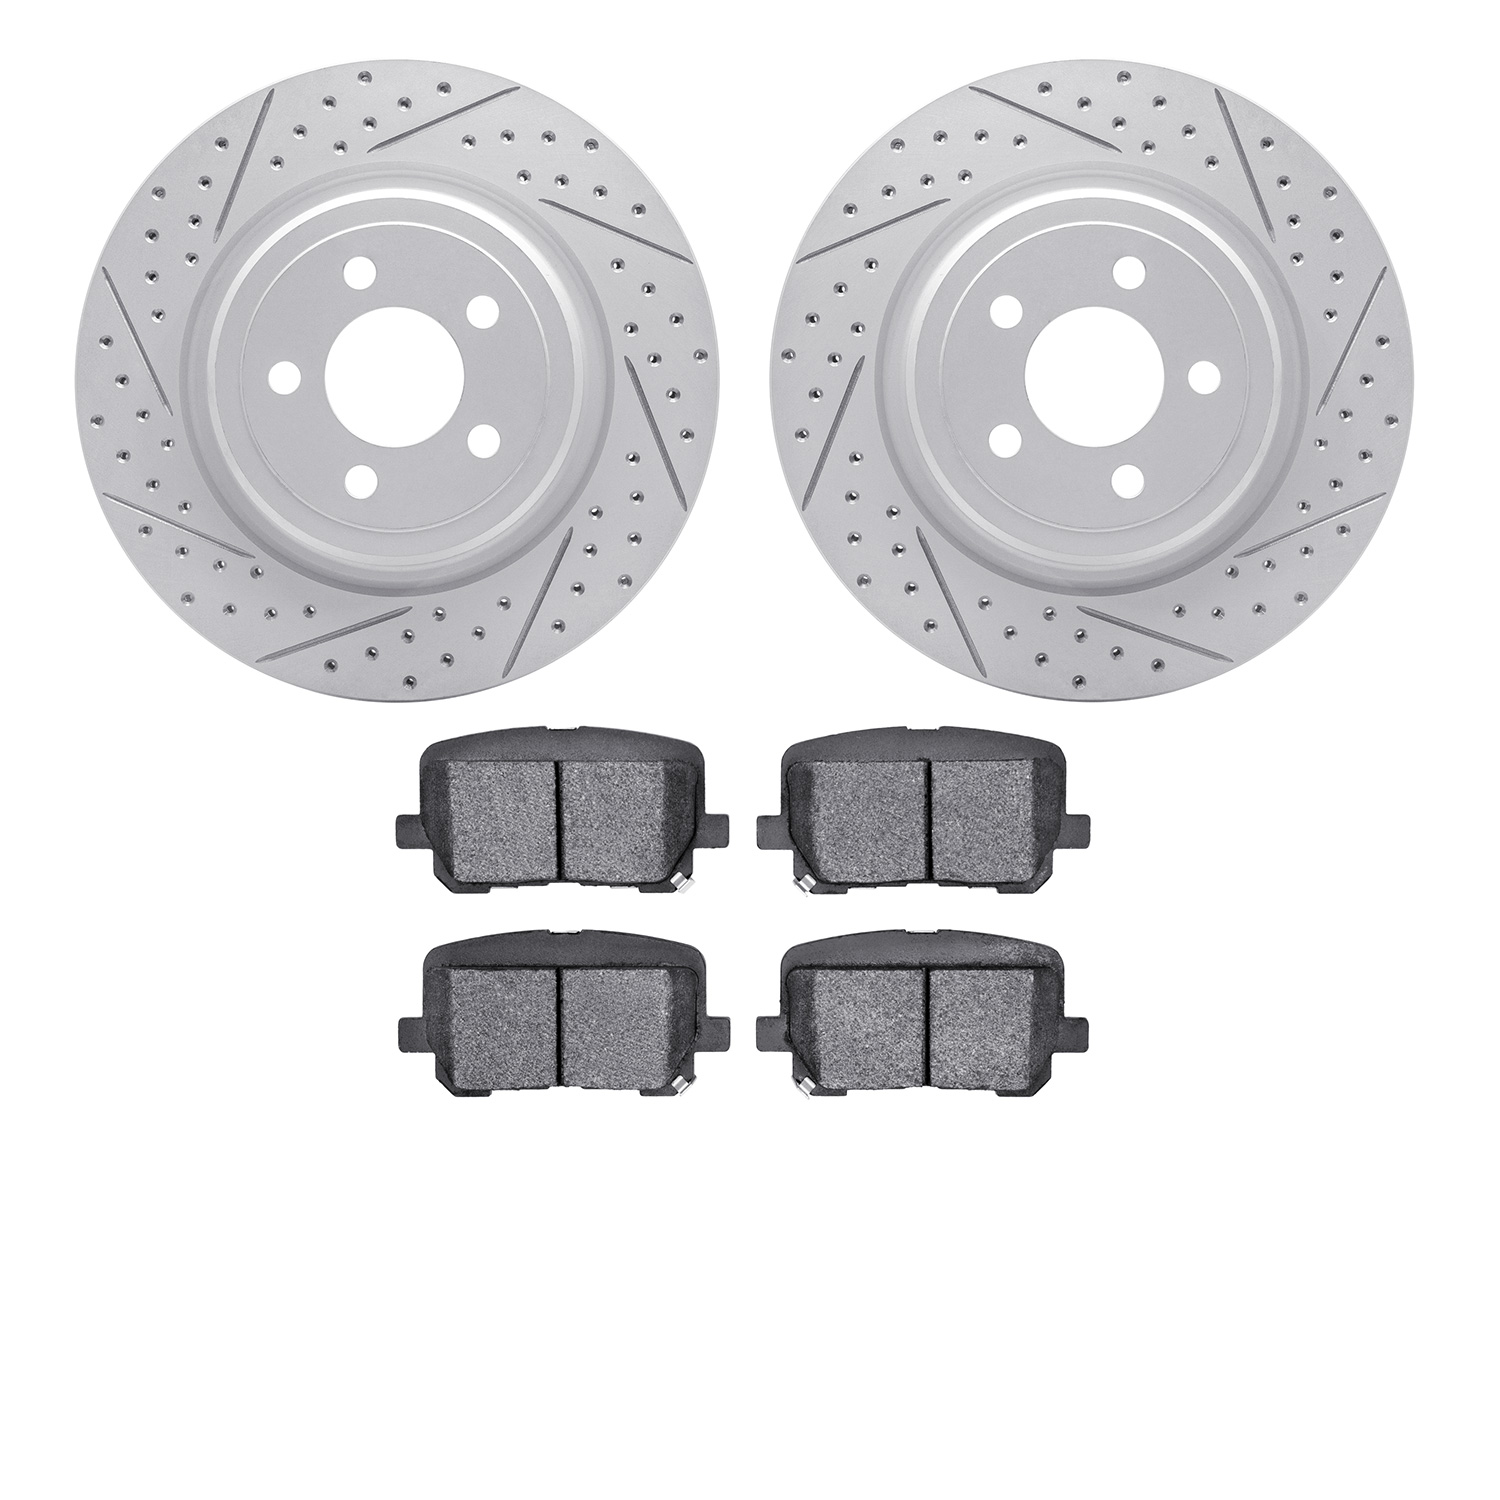 2502-39020 Geoperformance Drilled/Slotted Rotors w/5000 Advanced Brake Pads Kit, Fits Select Mopar, Position: Rear